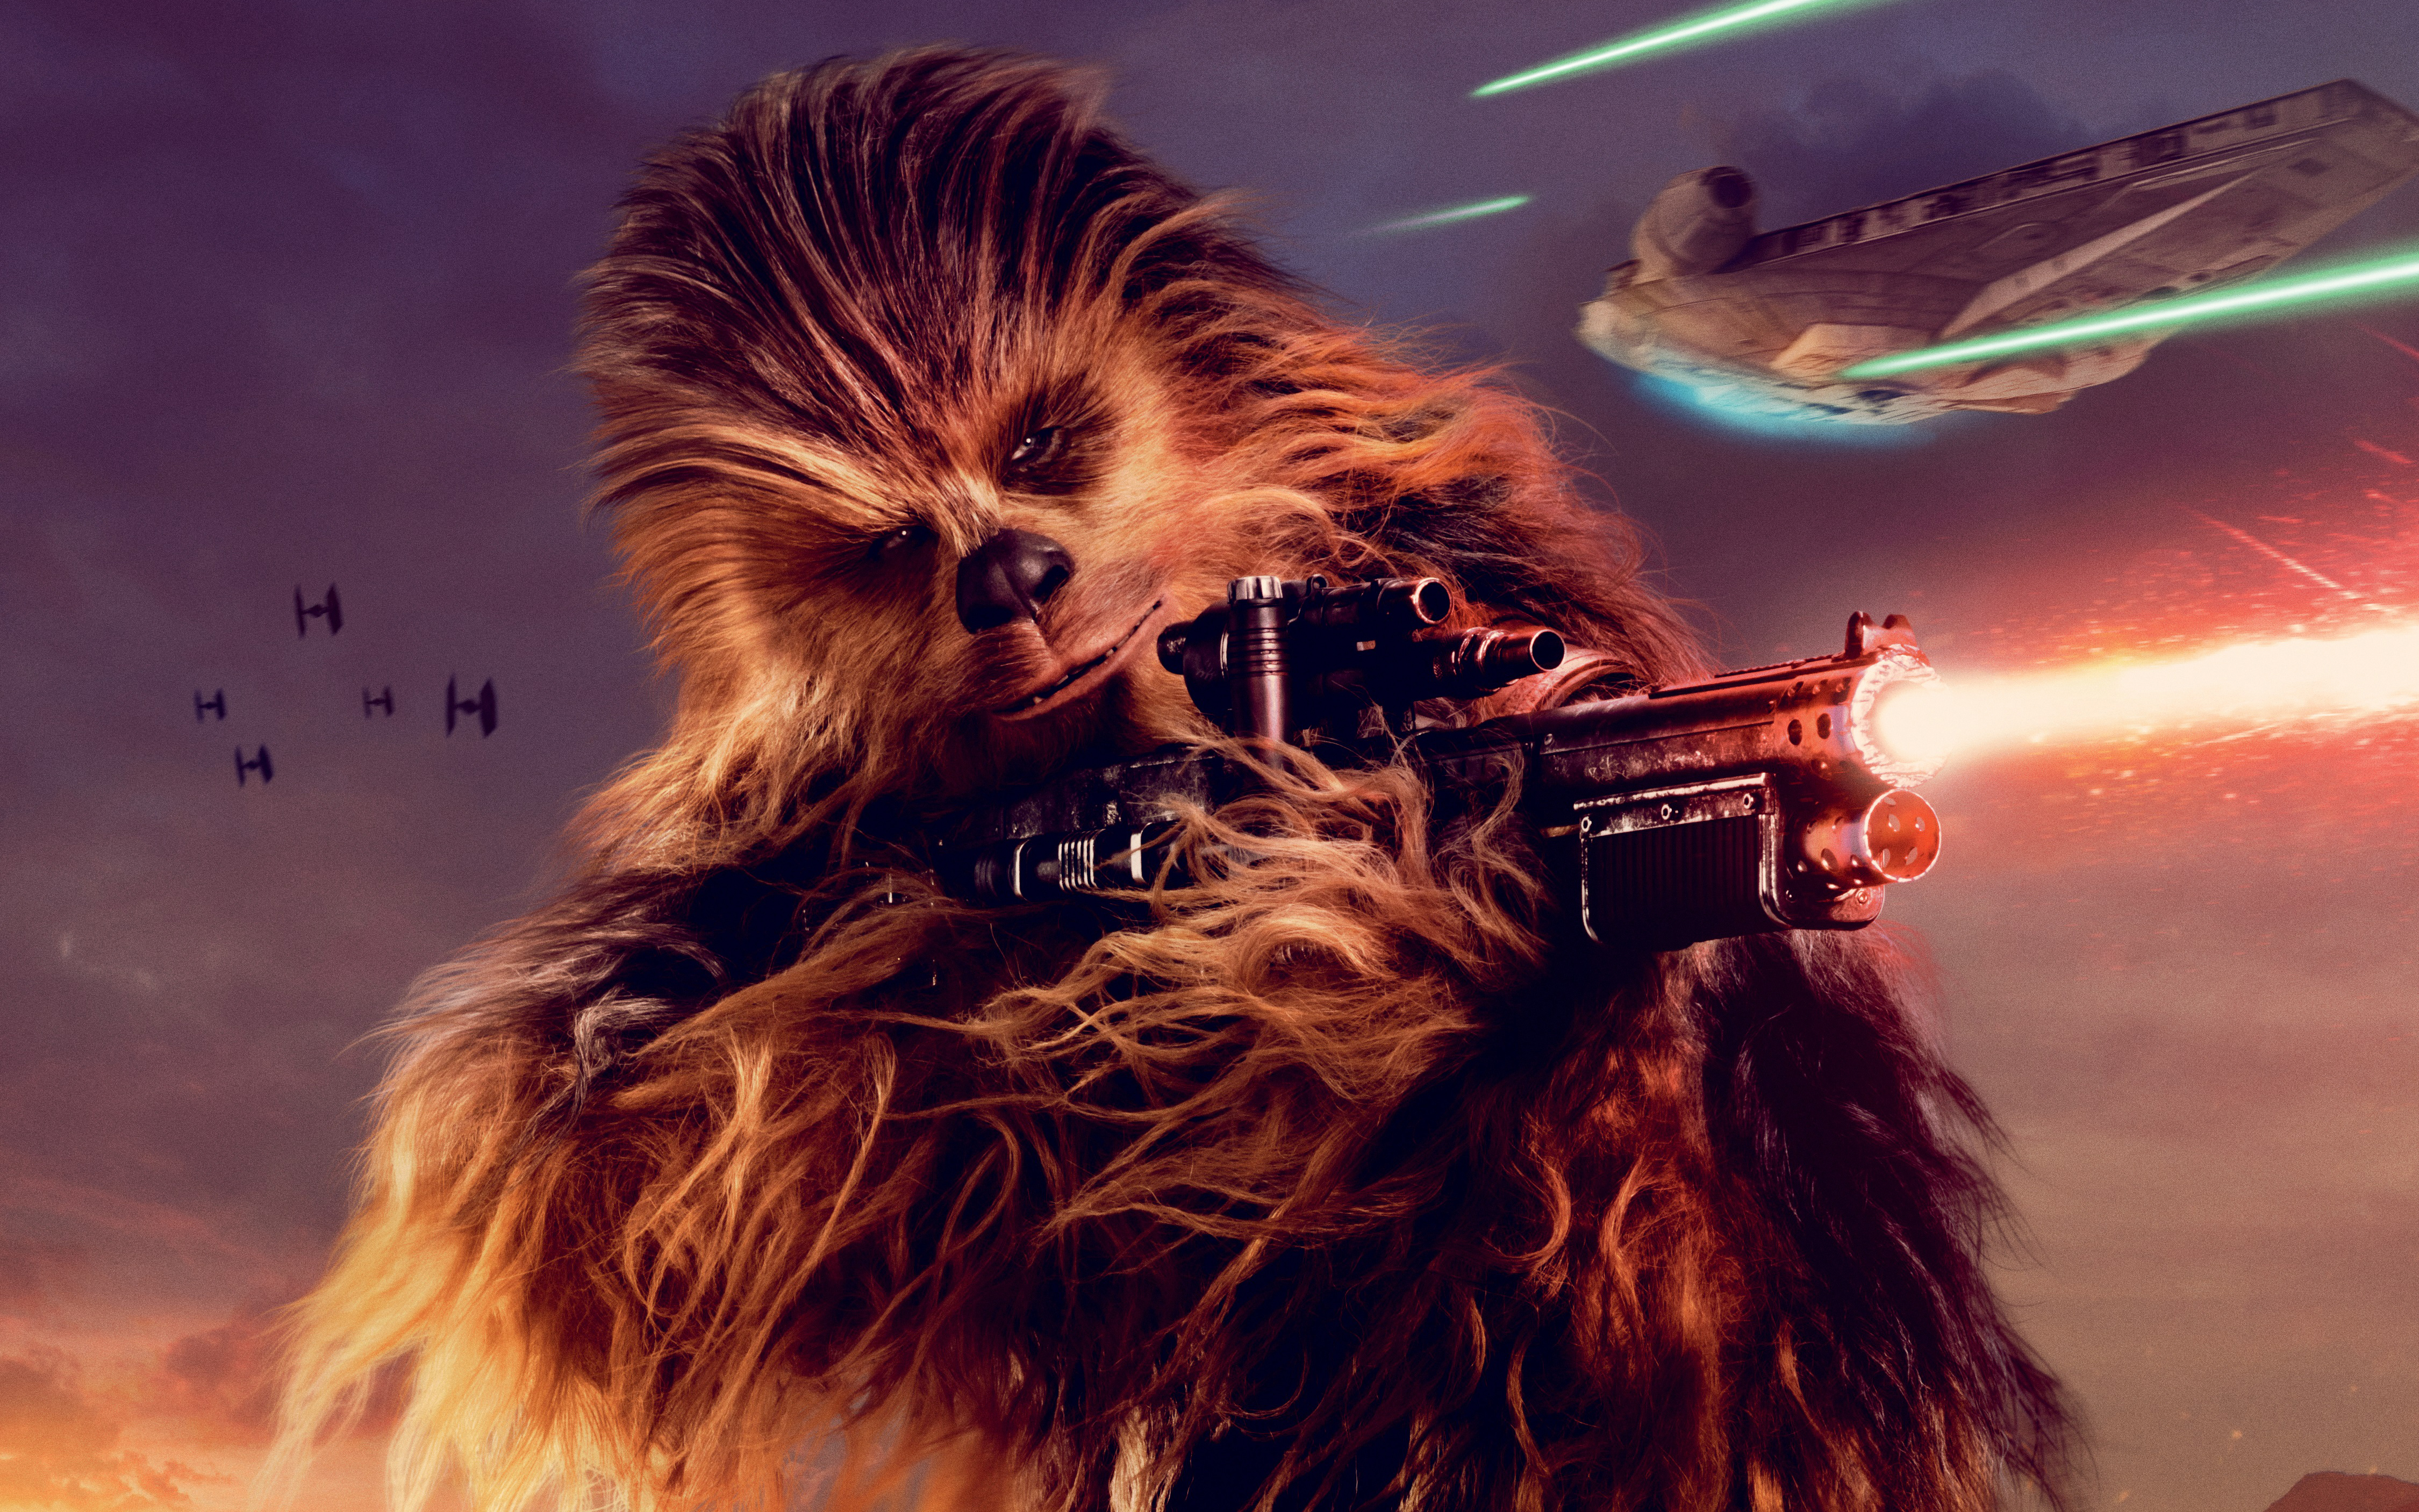 Chewbacca Solo A Star Wars Story 4k Wallpapers - Star Wars 9 Chewbacca - HD Wallpaper 